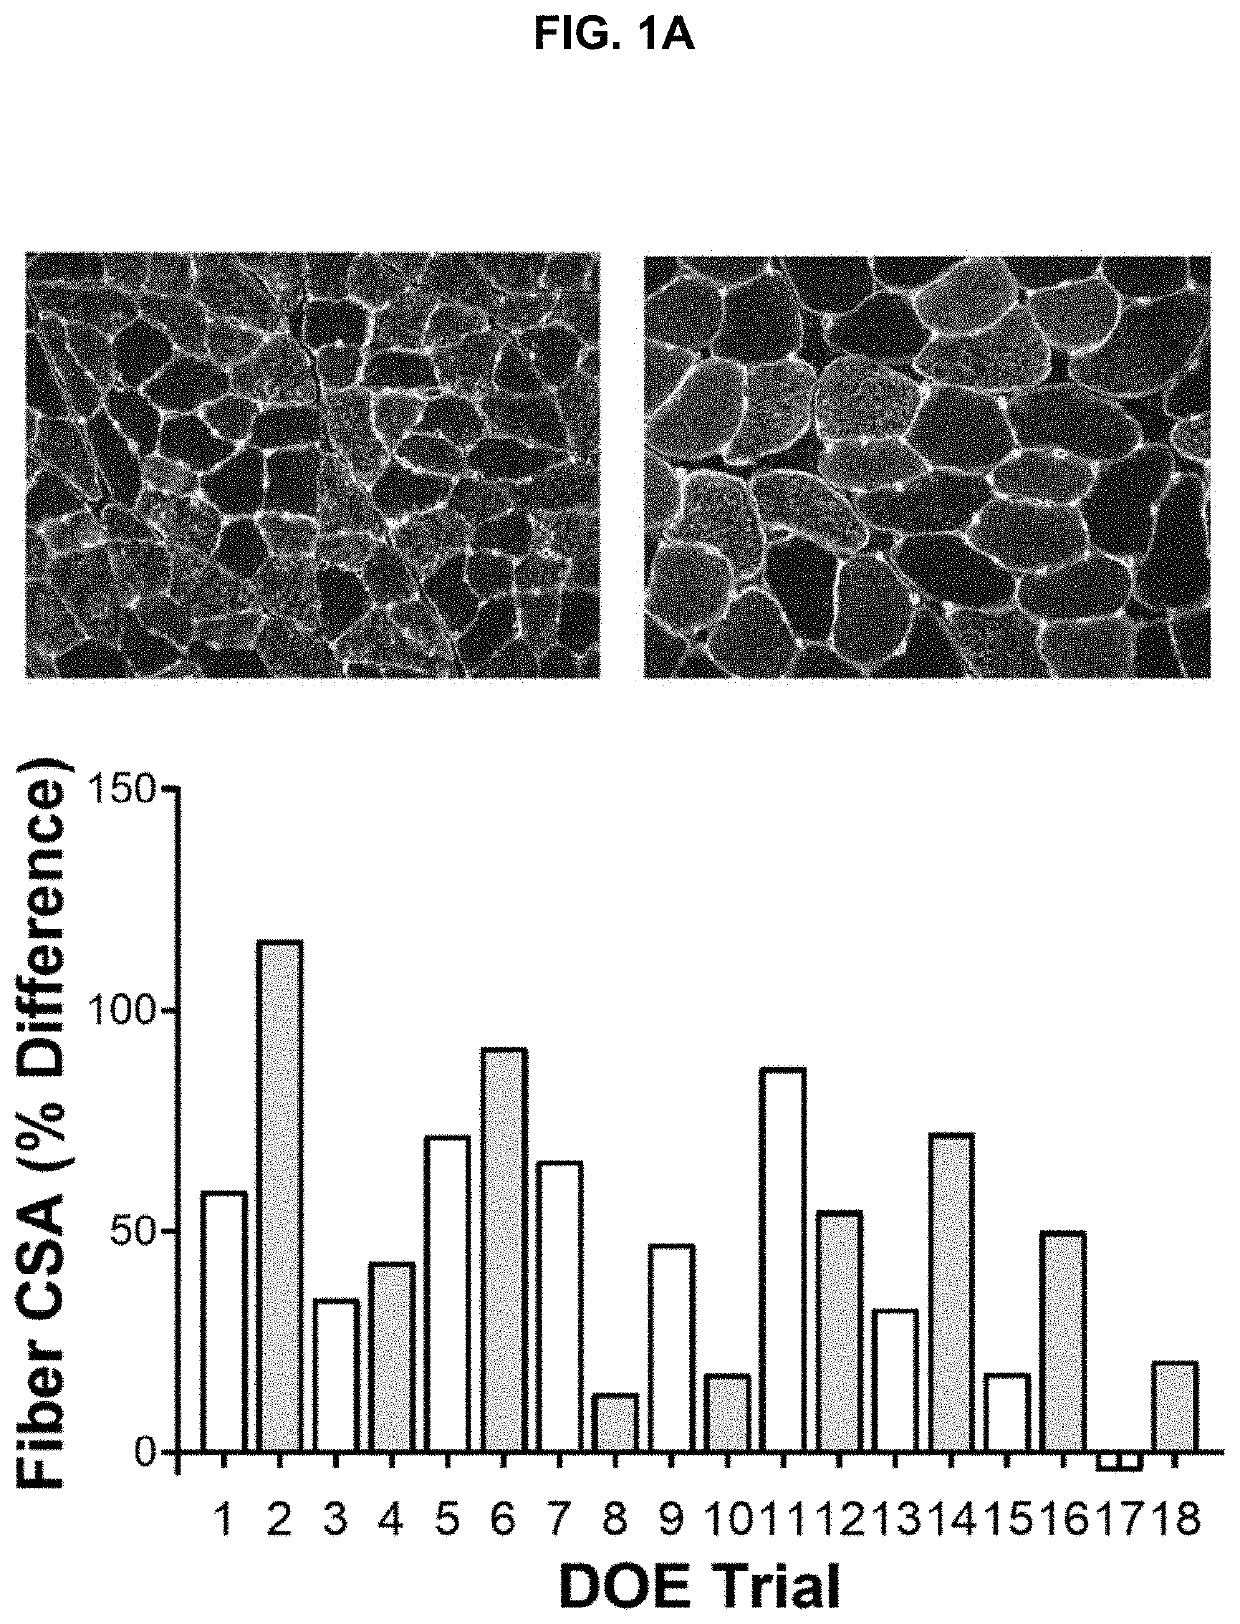 Novel nutrients to enhance load-induced muscle hypertrophy